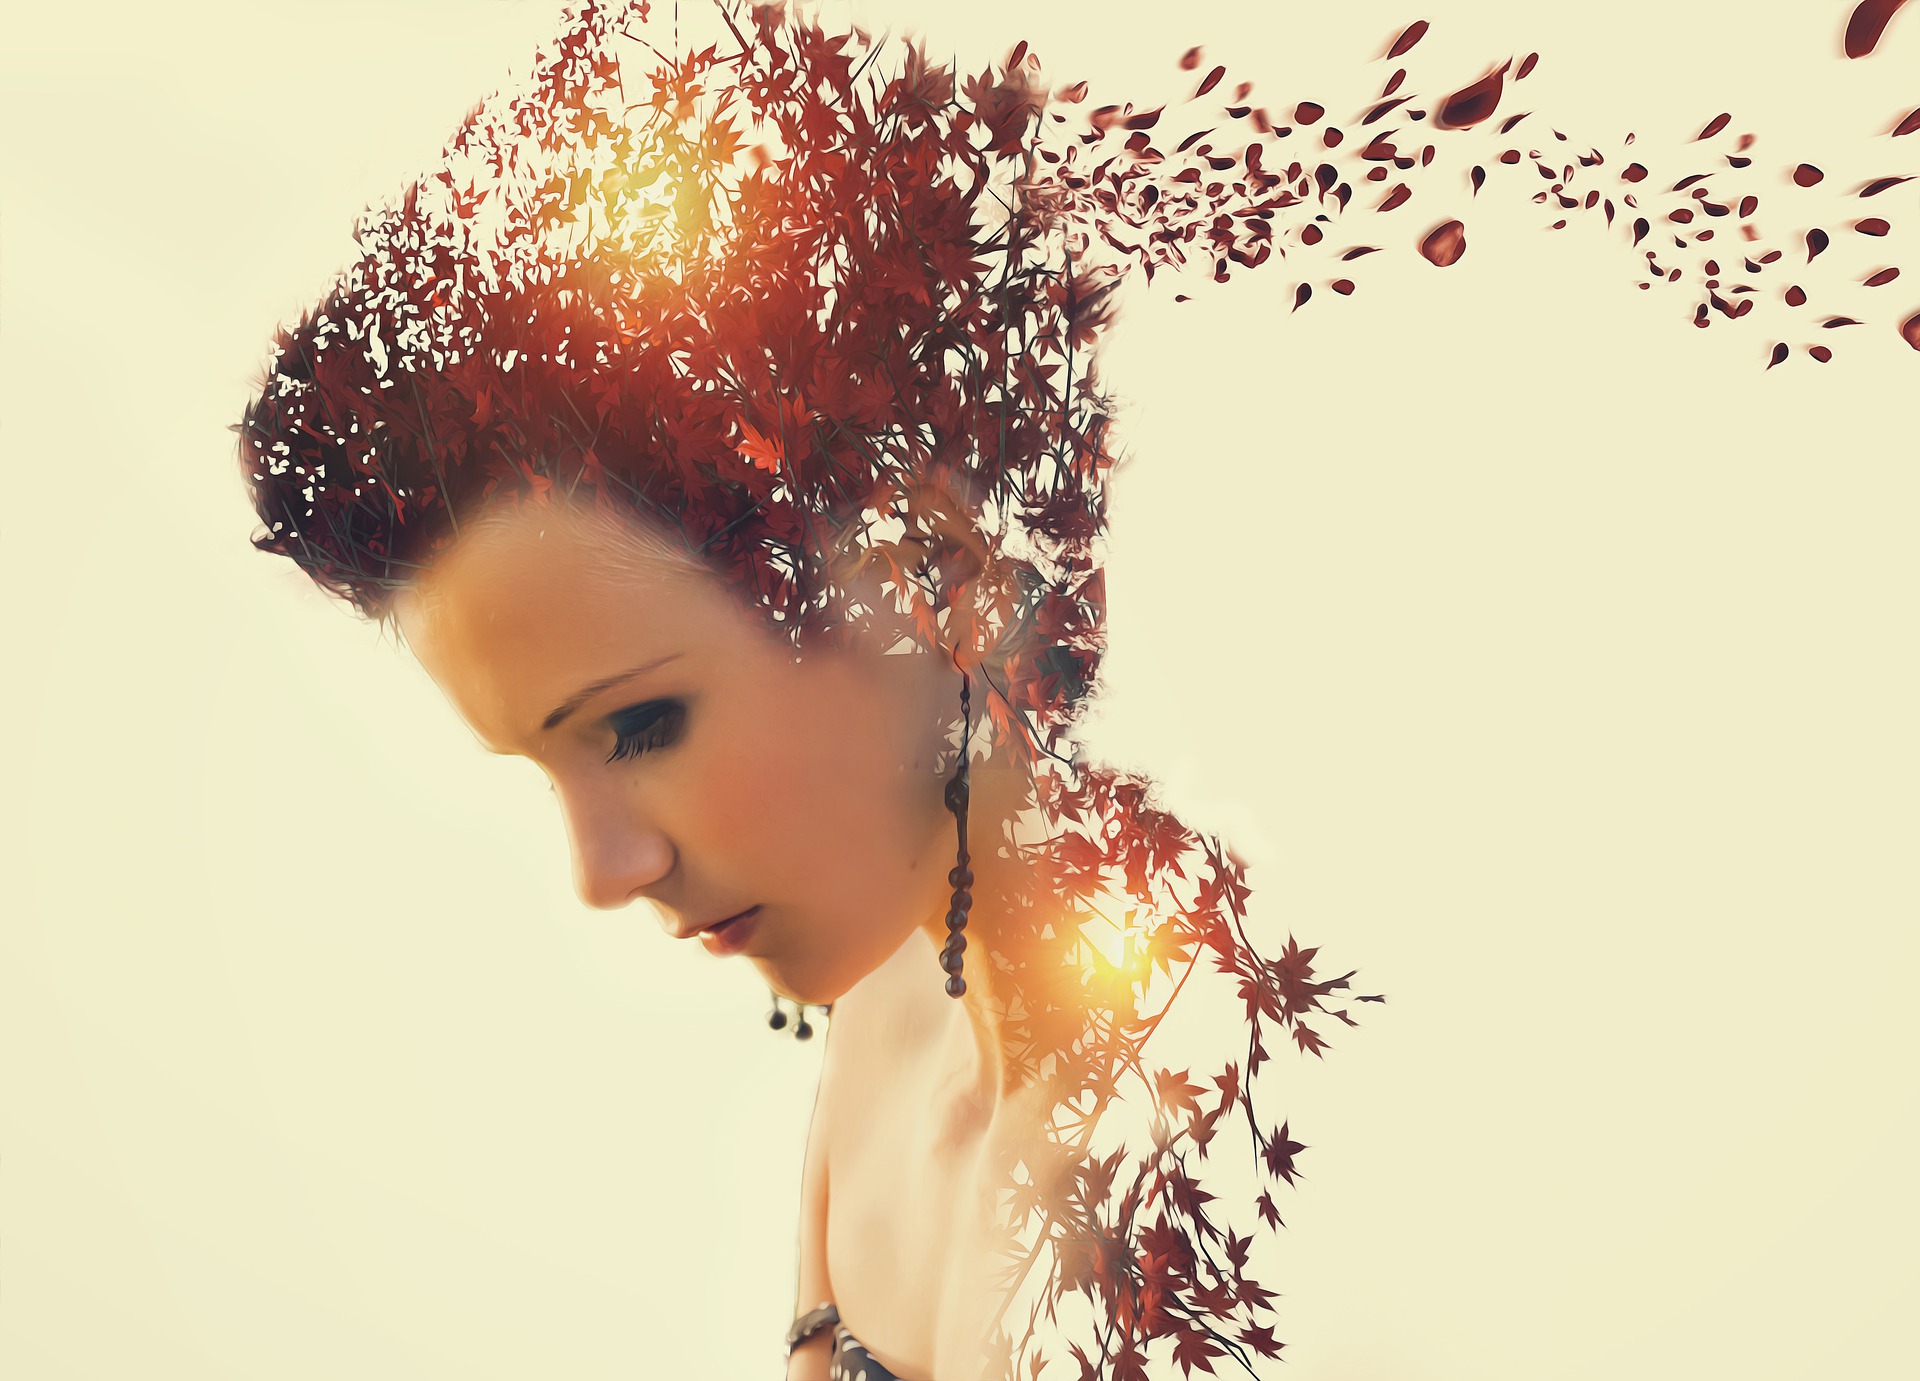 Double exposure white woman and falling leaves by Enrique Meseguer via Pixabay